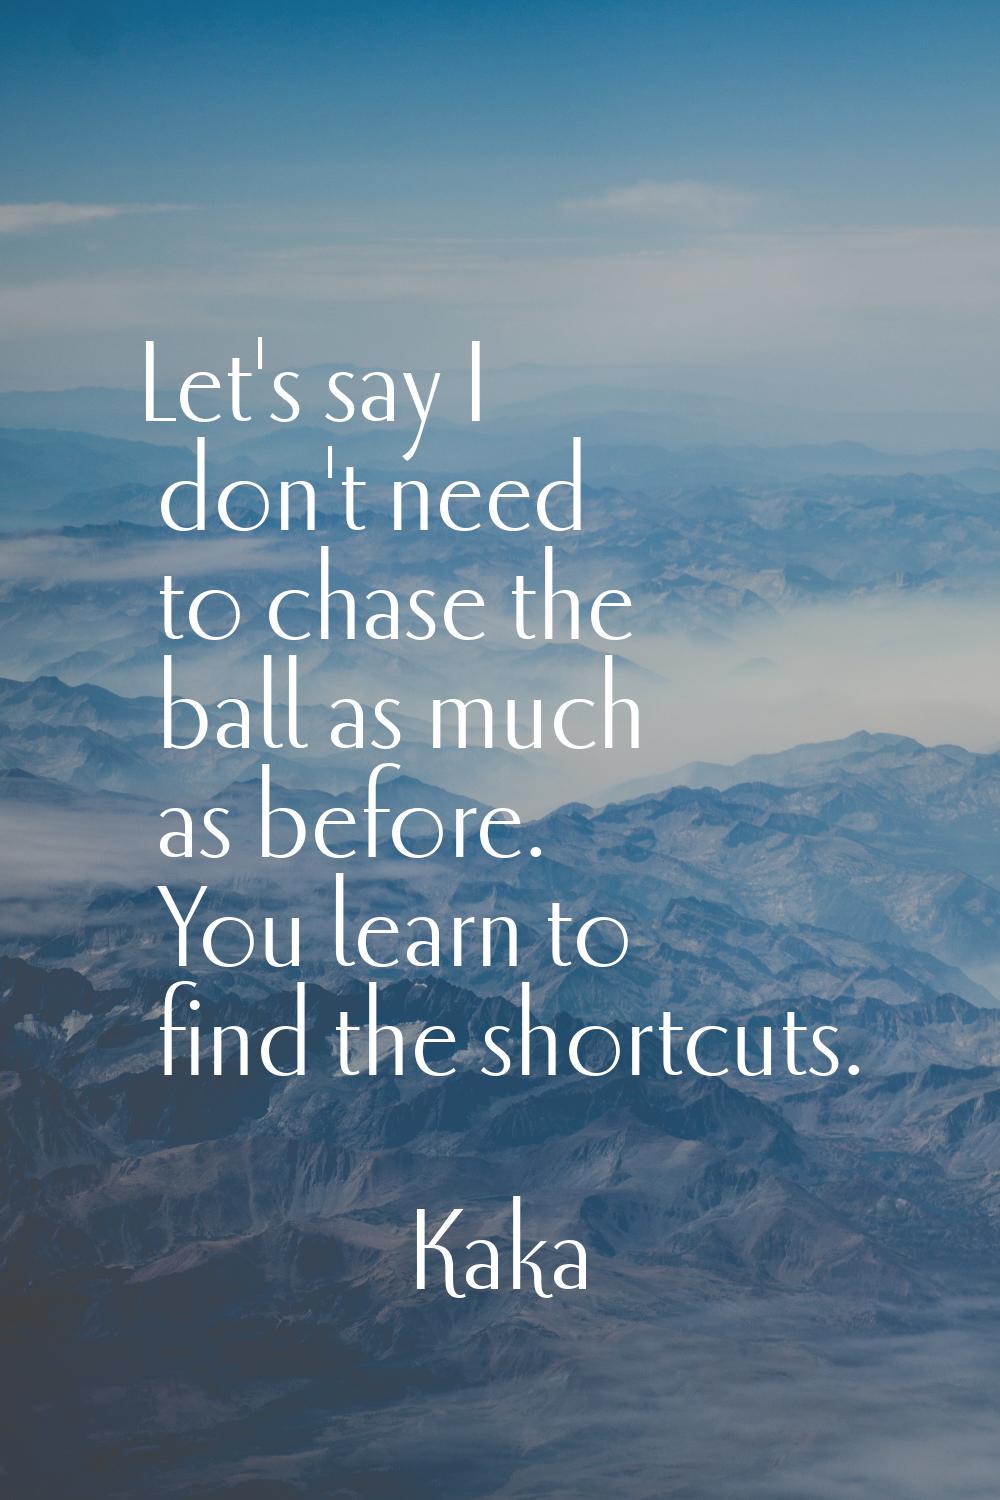 Let's say I don't need to chase the ball as much as before. You learn to find the shortcuts.